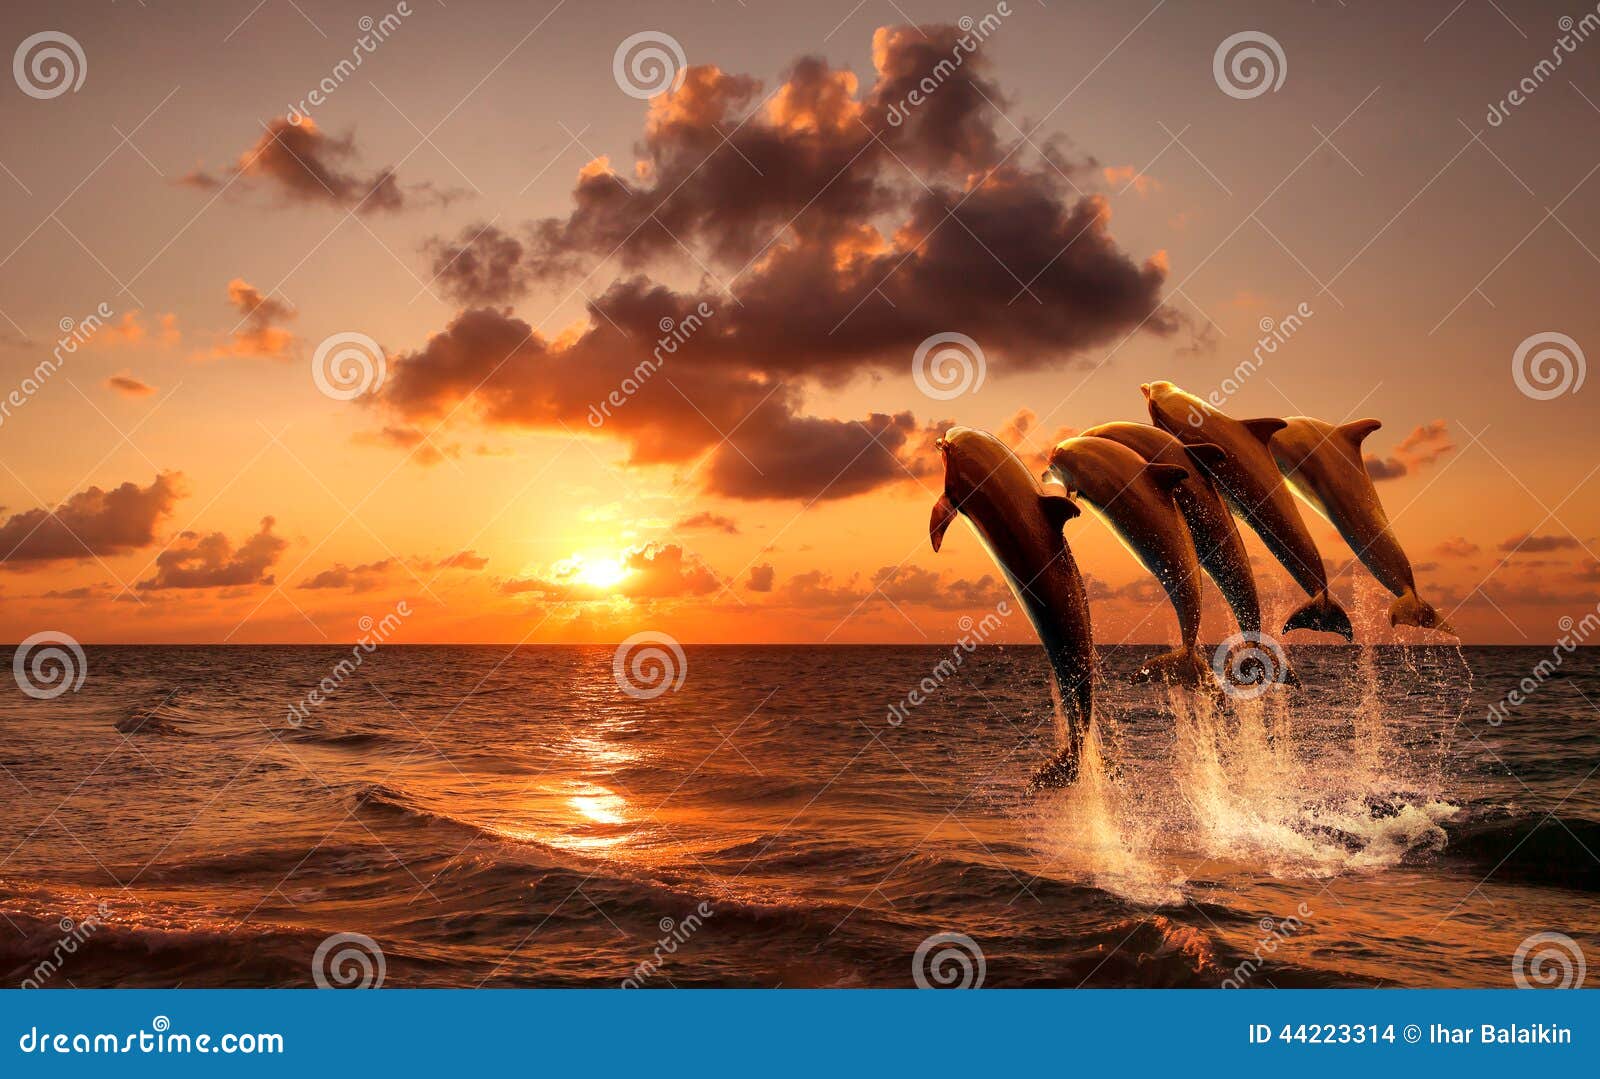 beautiful sunset with dolphins